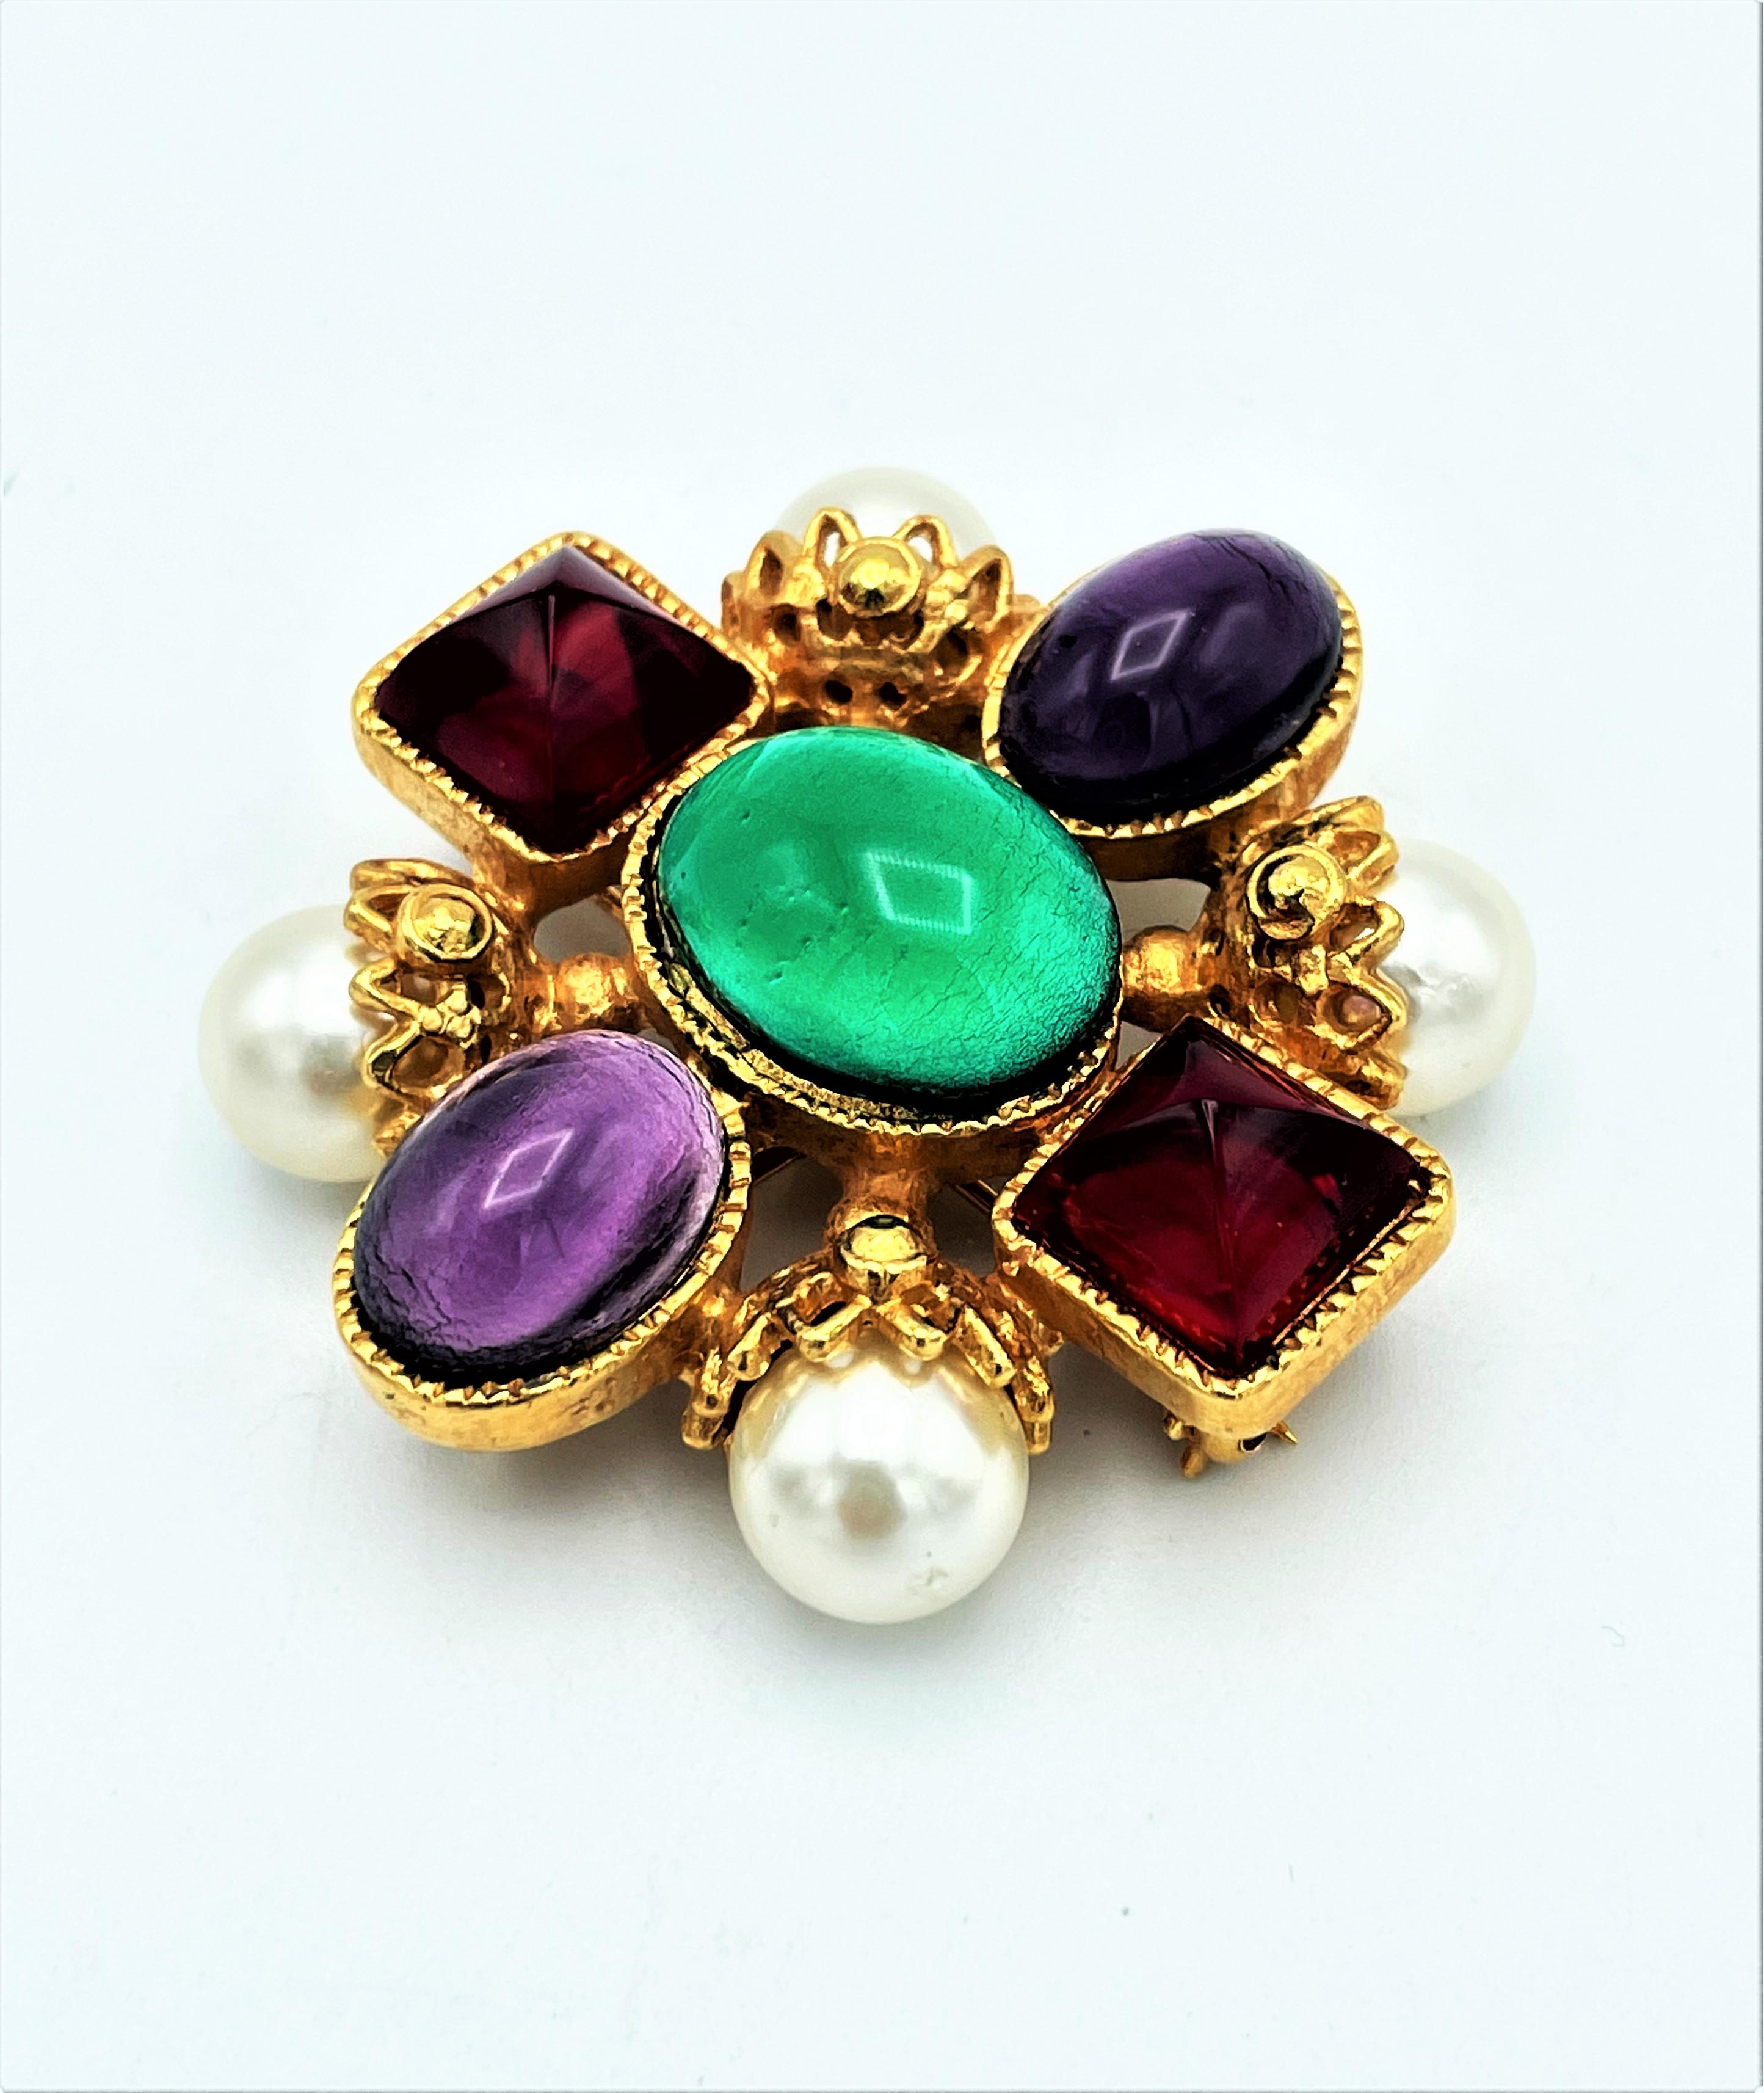 About
Chanel brooch or to wear as a pendant by Gripoix Paris. Beautiful cast glass colors and handmade glass beads.
Measurement: H 4,8 cm x W 4,5 cm, D 1,5 cm. Pearl size 1 cm in diameter,
Features
- Autentique Chanel broch, signed on the back 07 A